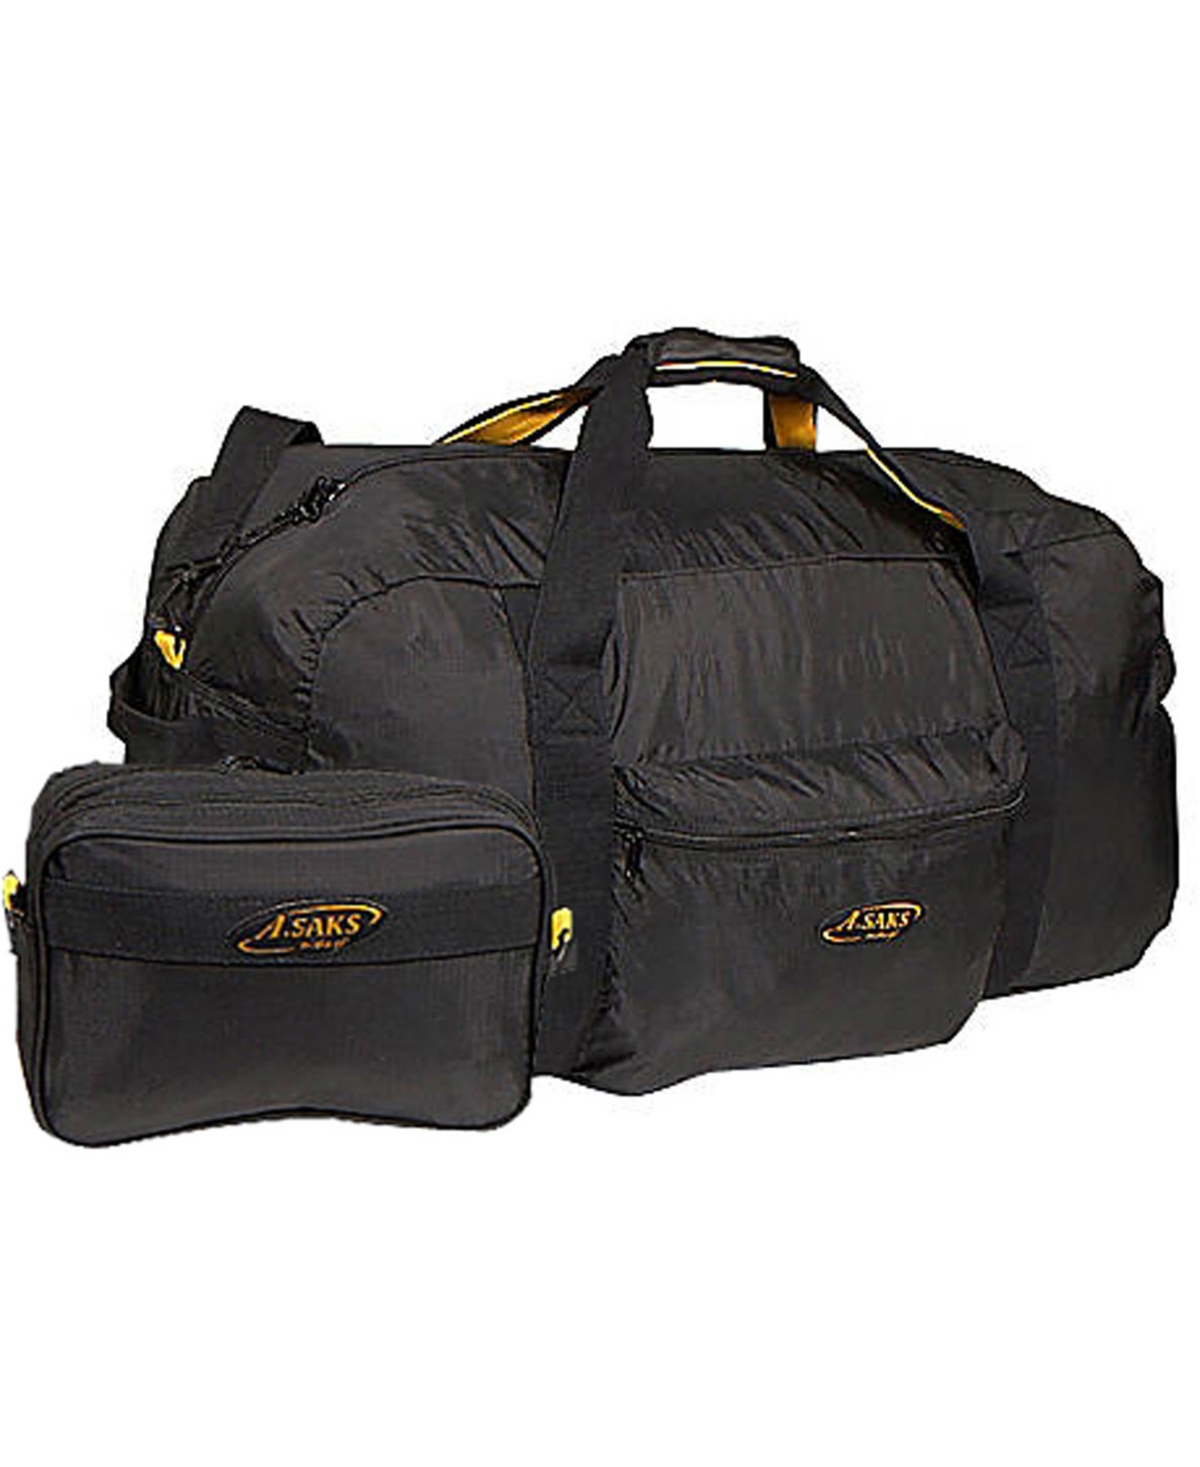 30" Duffel Bag with Pouch - Black